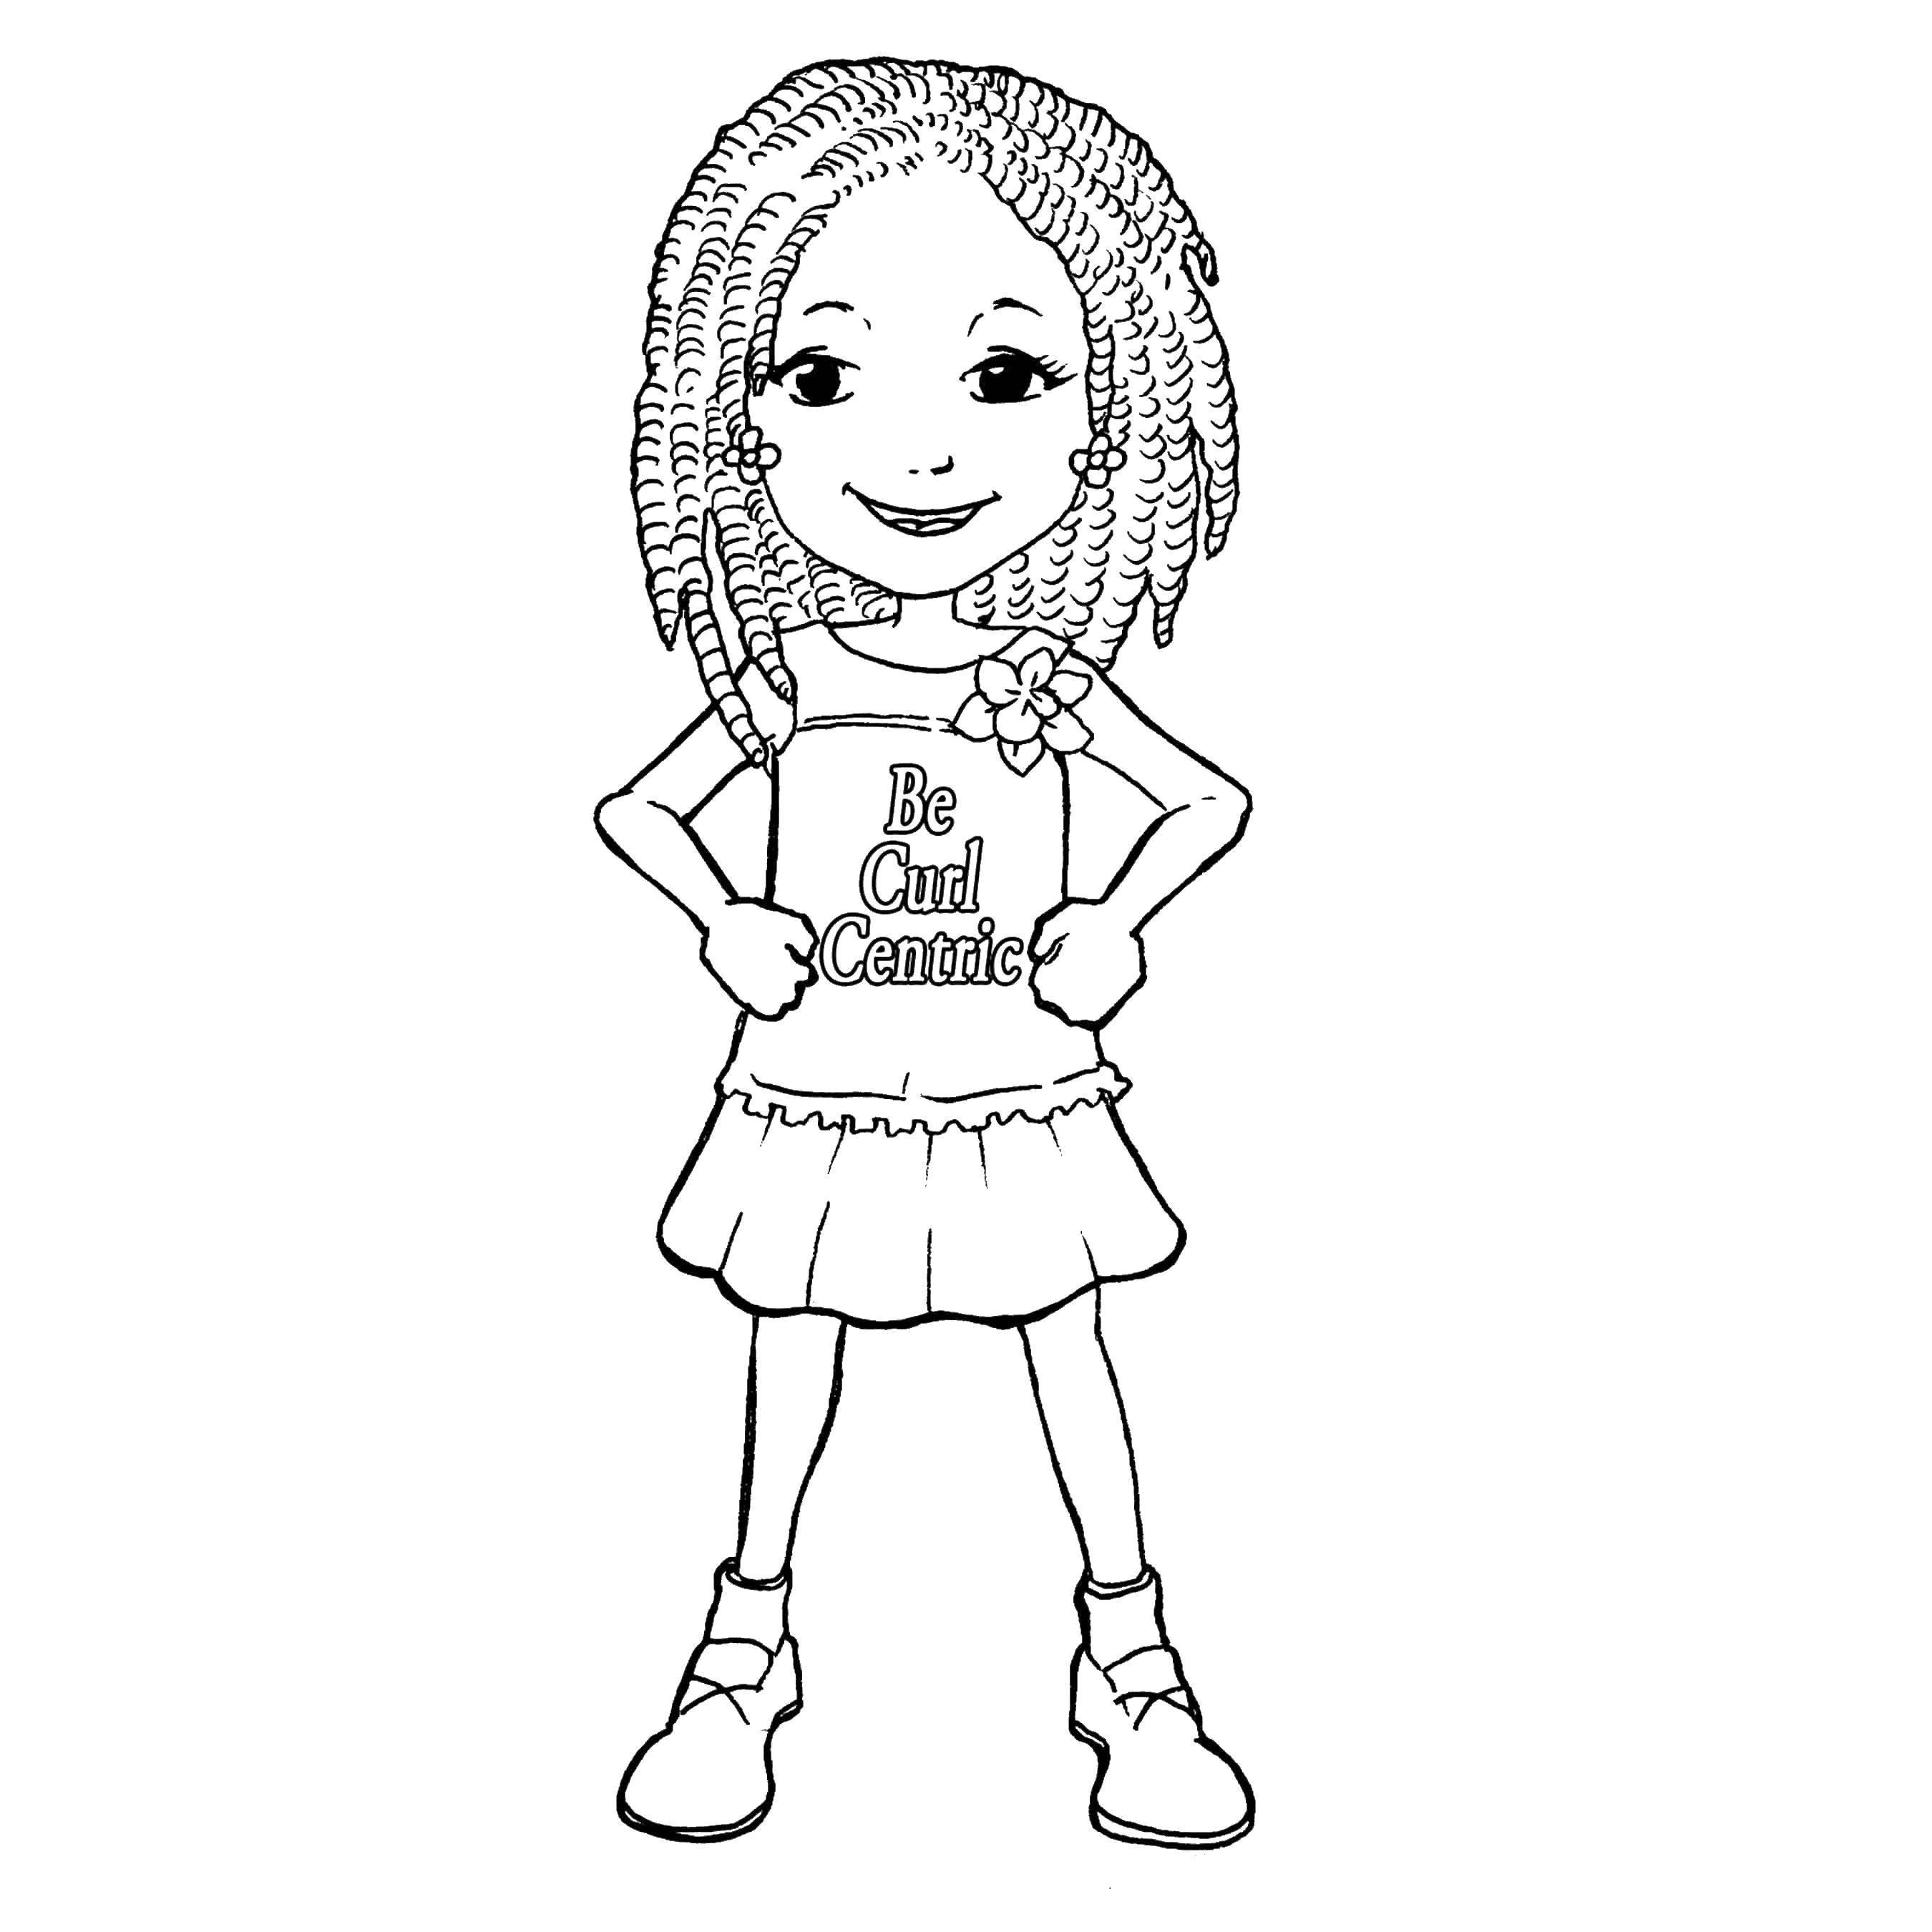 Coloring Girl. Category For girls. Tags:  girl.